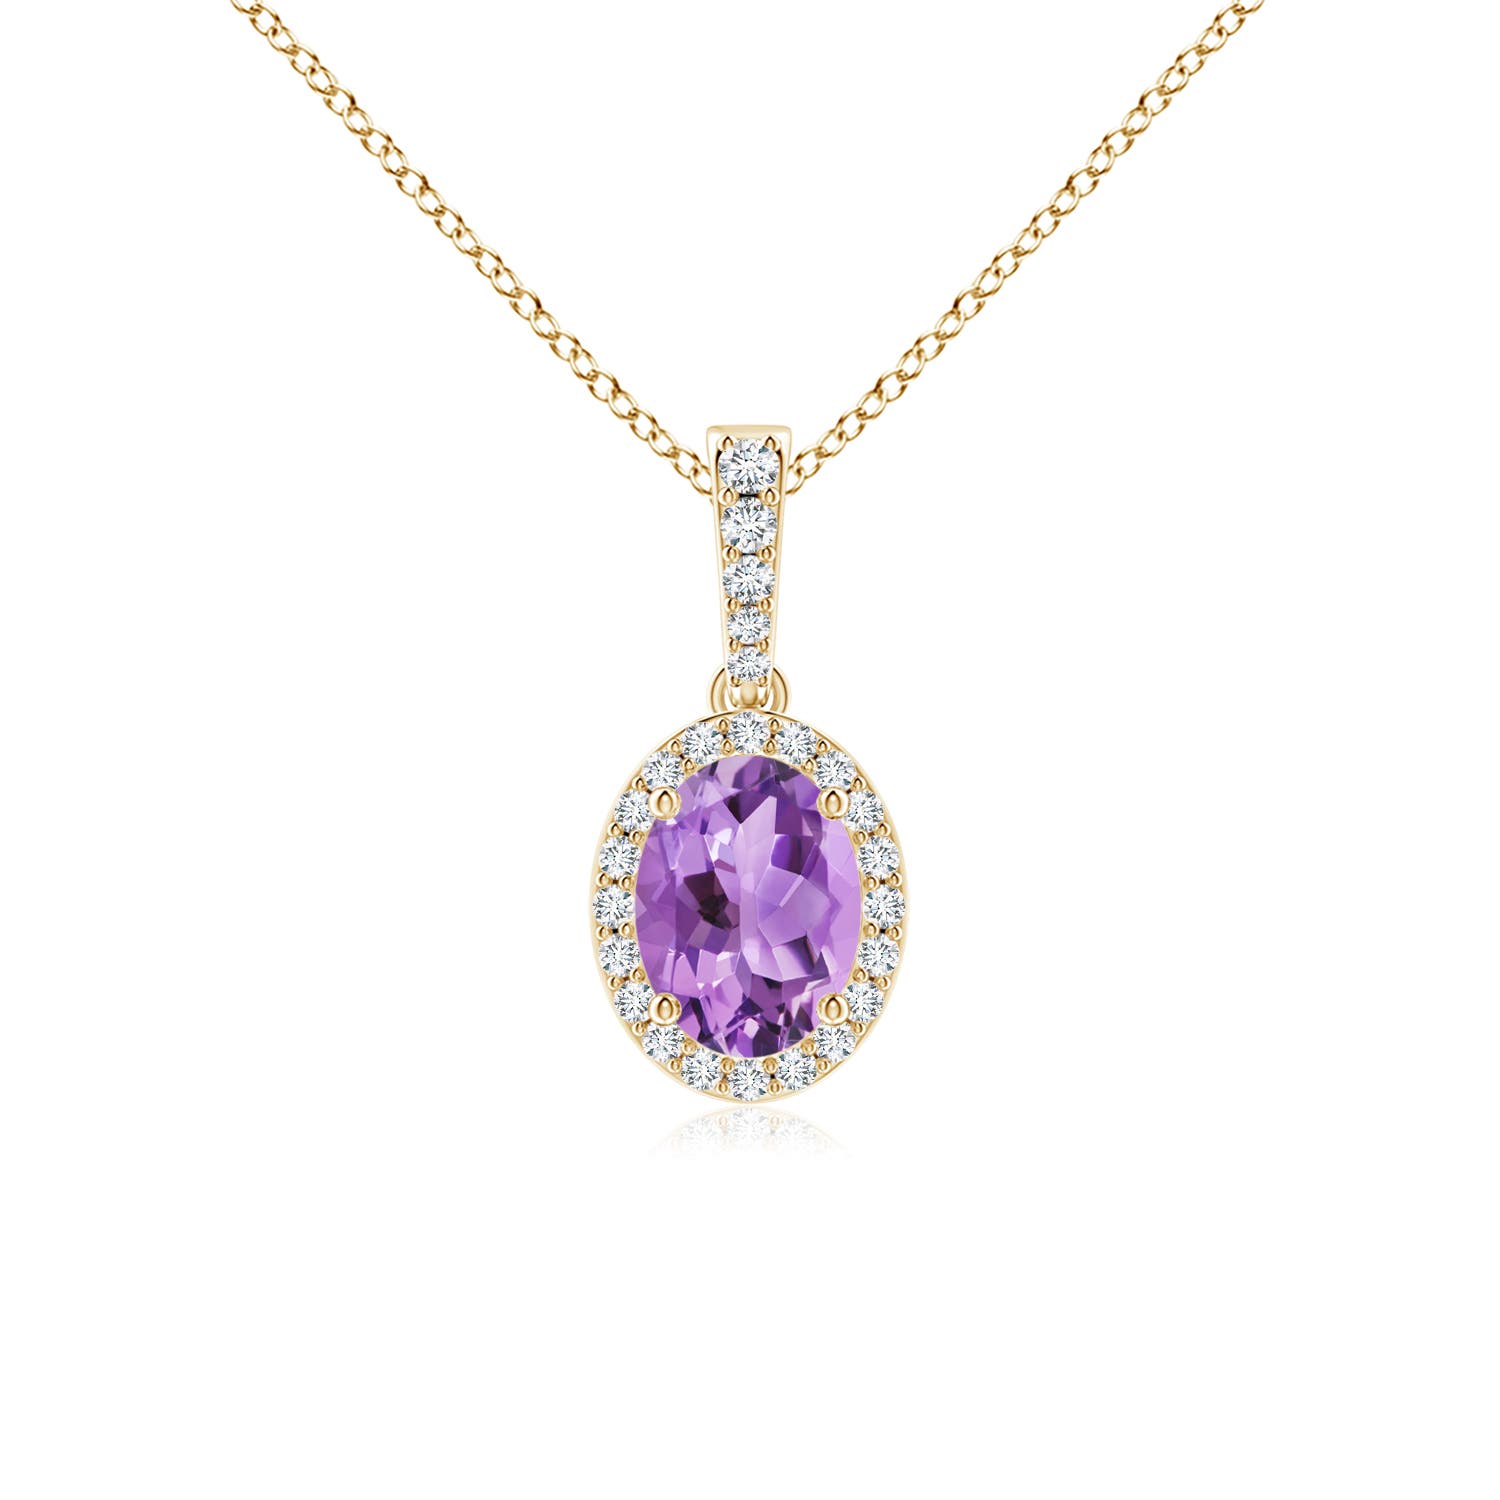 A - Amethyst / 1.34 CT / 14 KT Yellow Gold